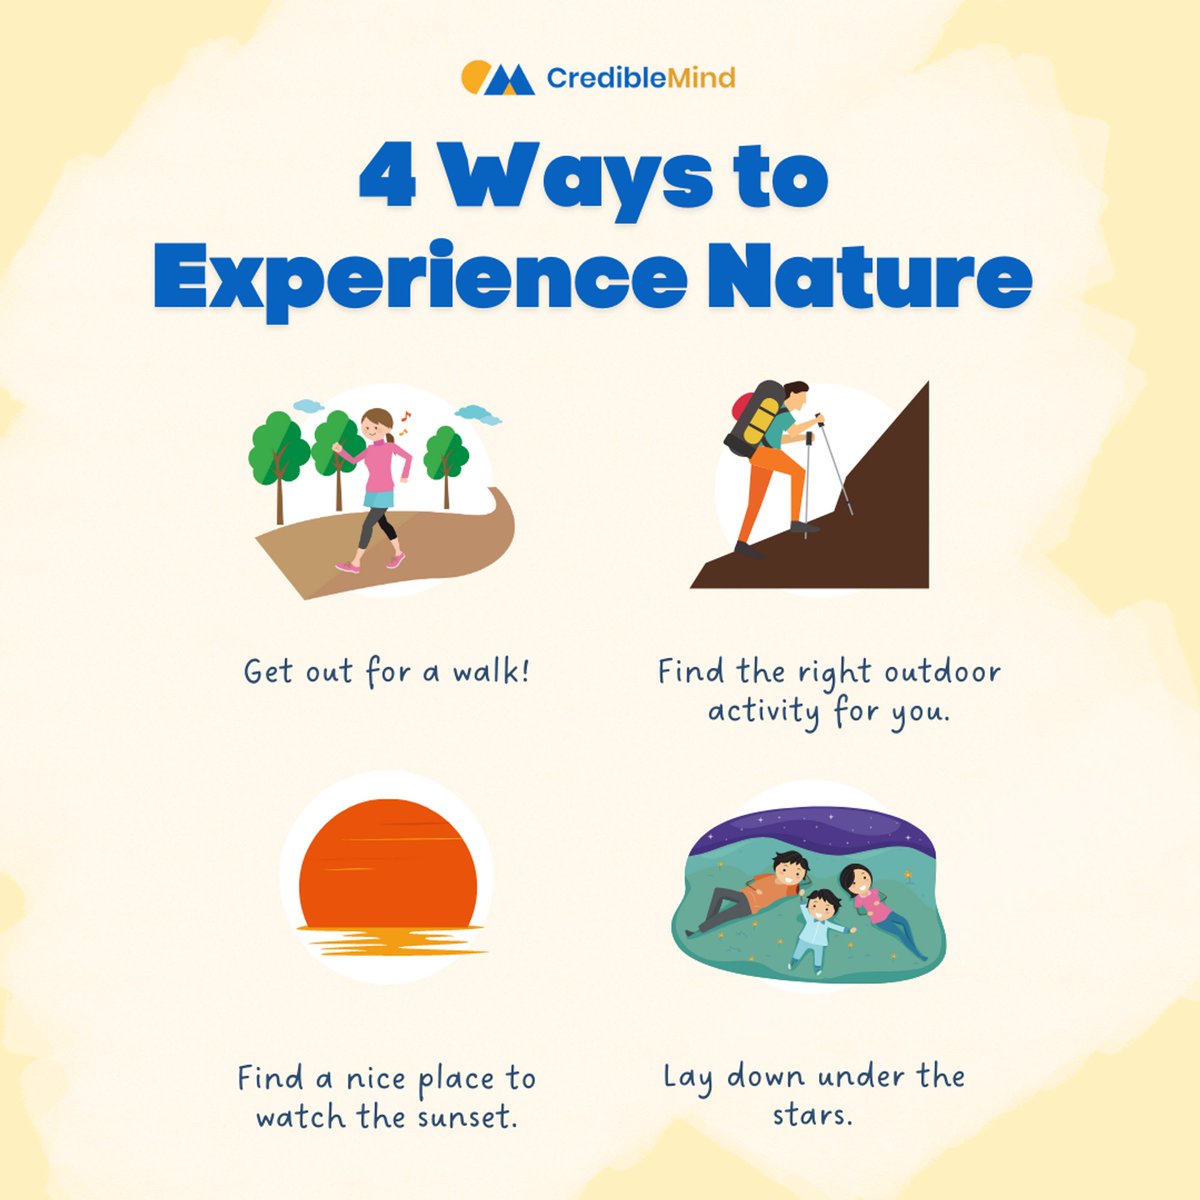 Did you know that spending time outside can improve your mental health? Visit bit.ly/3wPvUbP to find more ways to experience nature and improve your mental health outdoors! #StigmaFreeFishers #FishersIN #Fishers